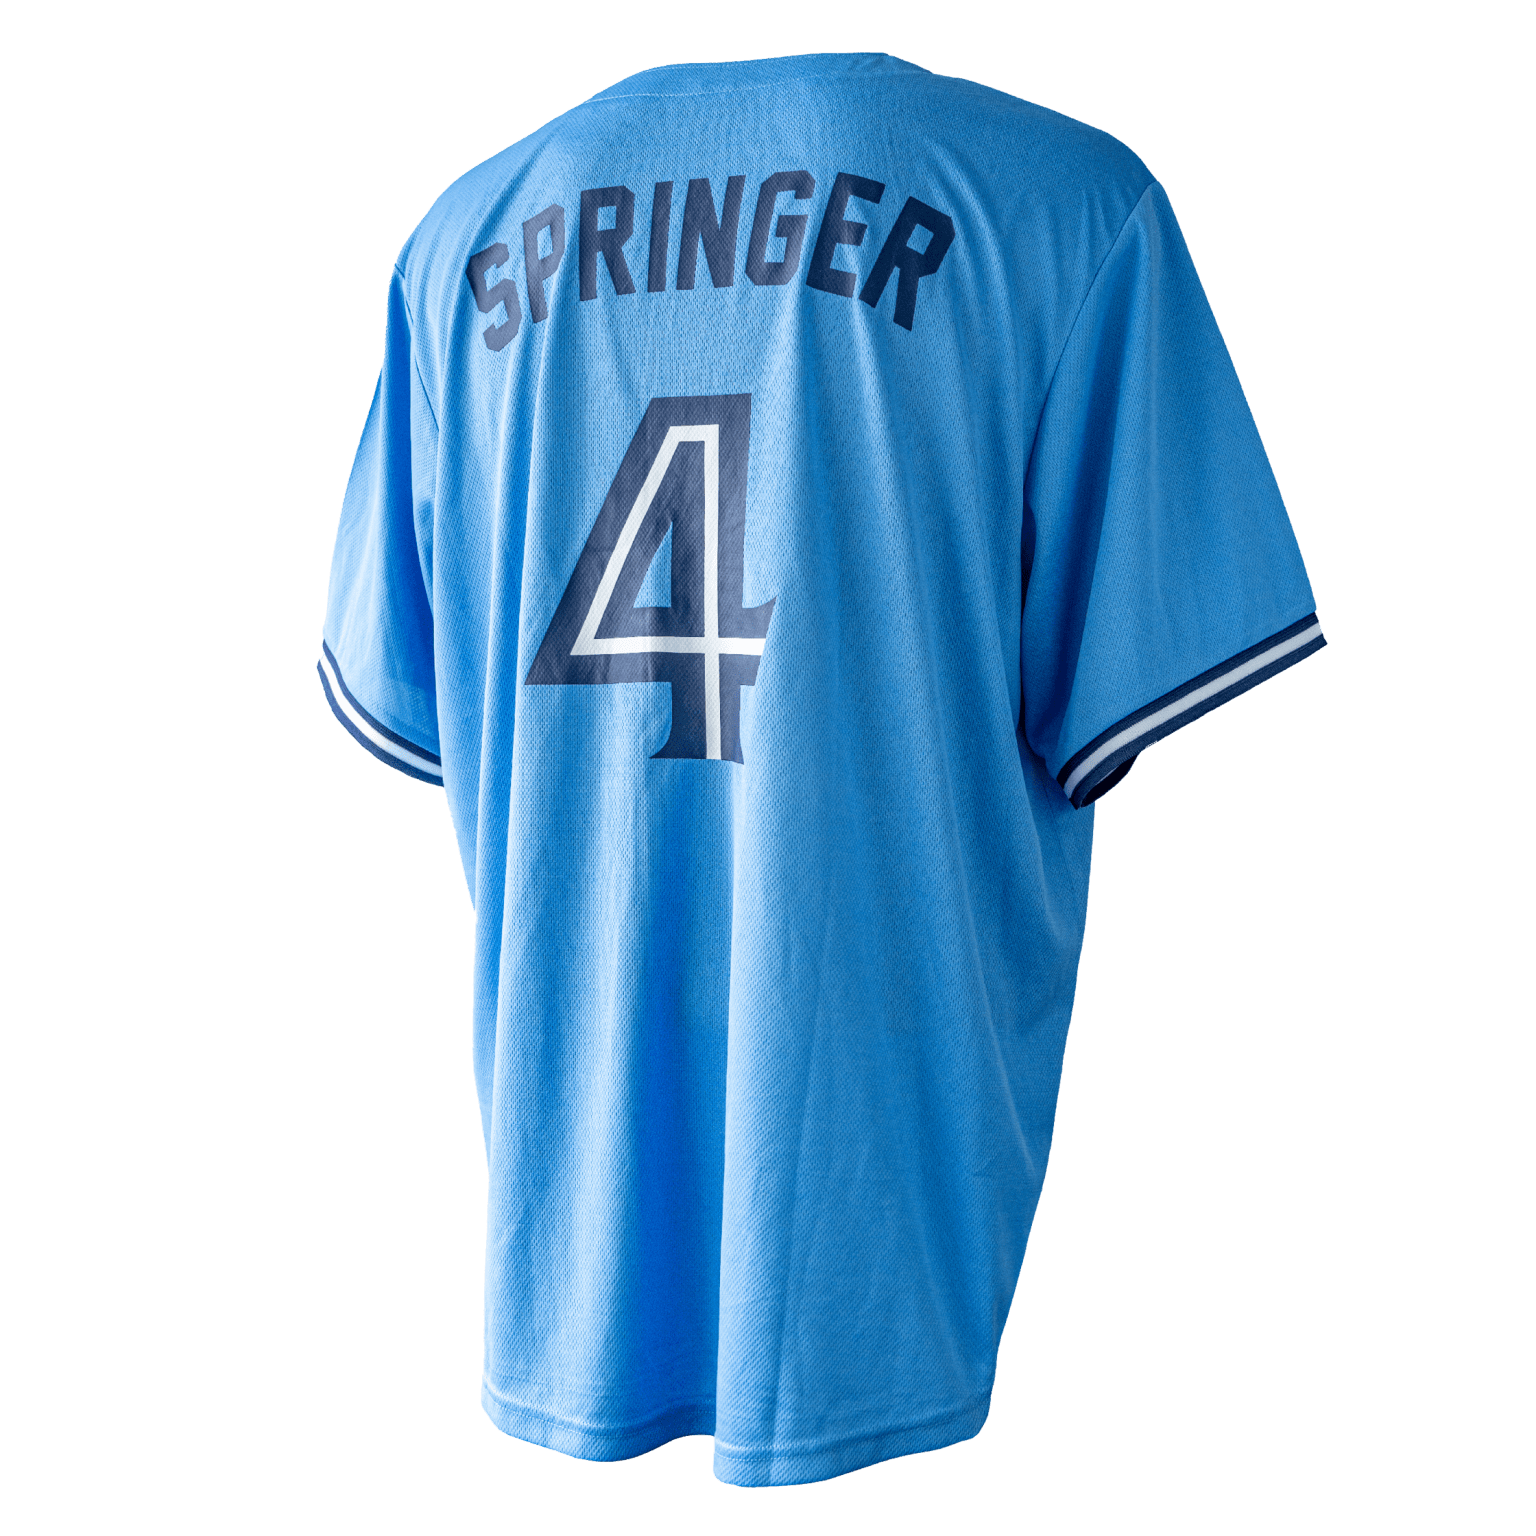 blue jays red jersey for sale